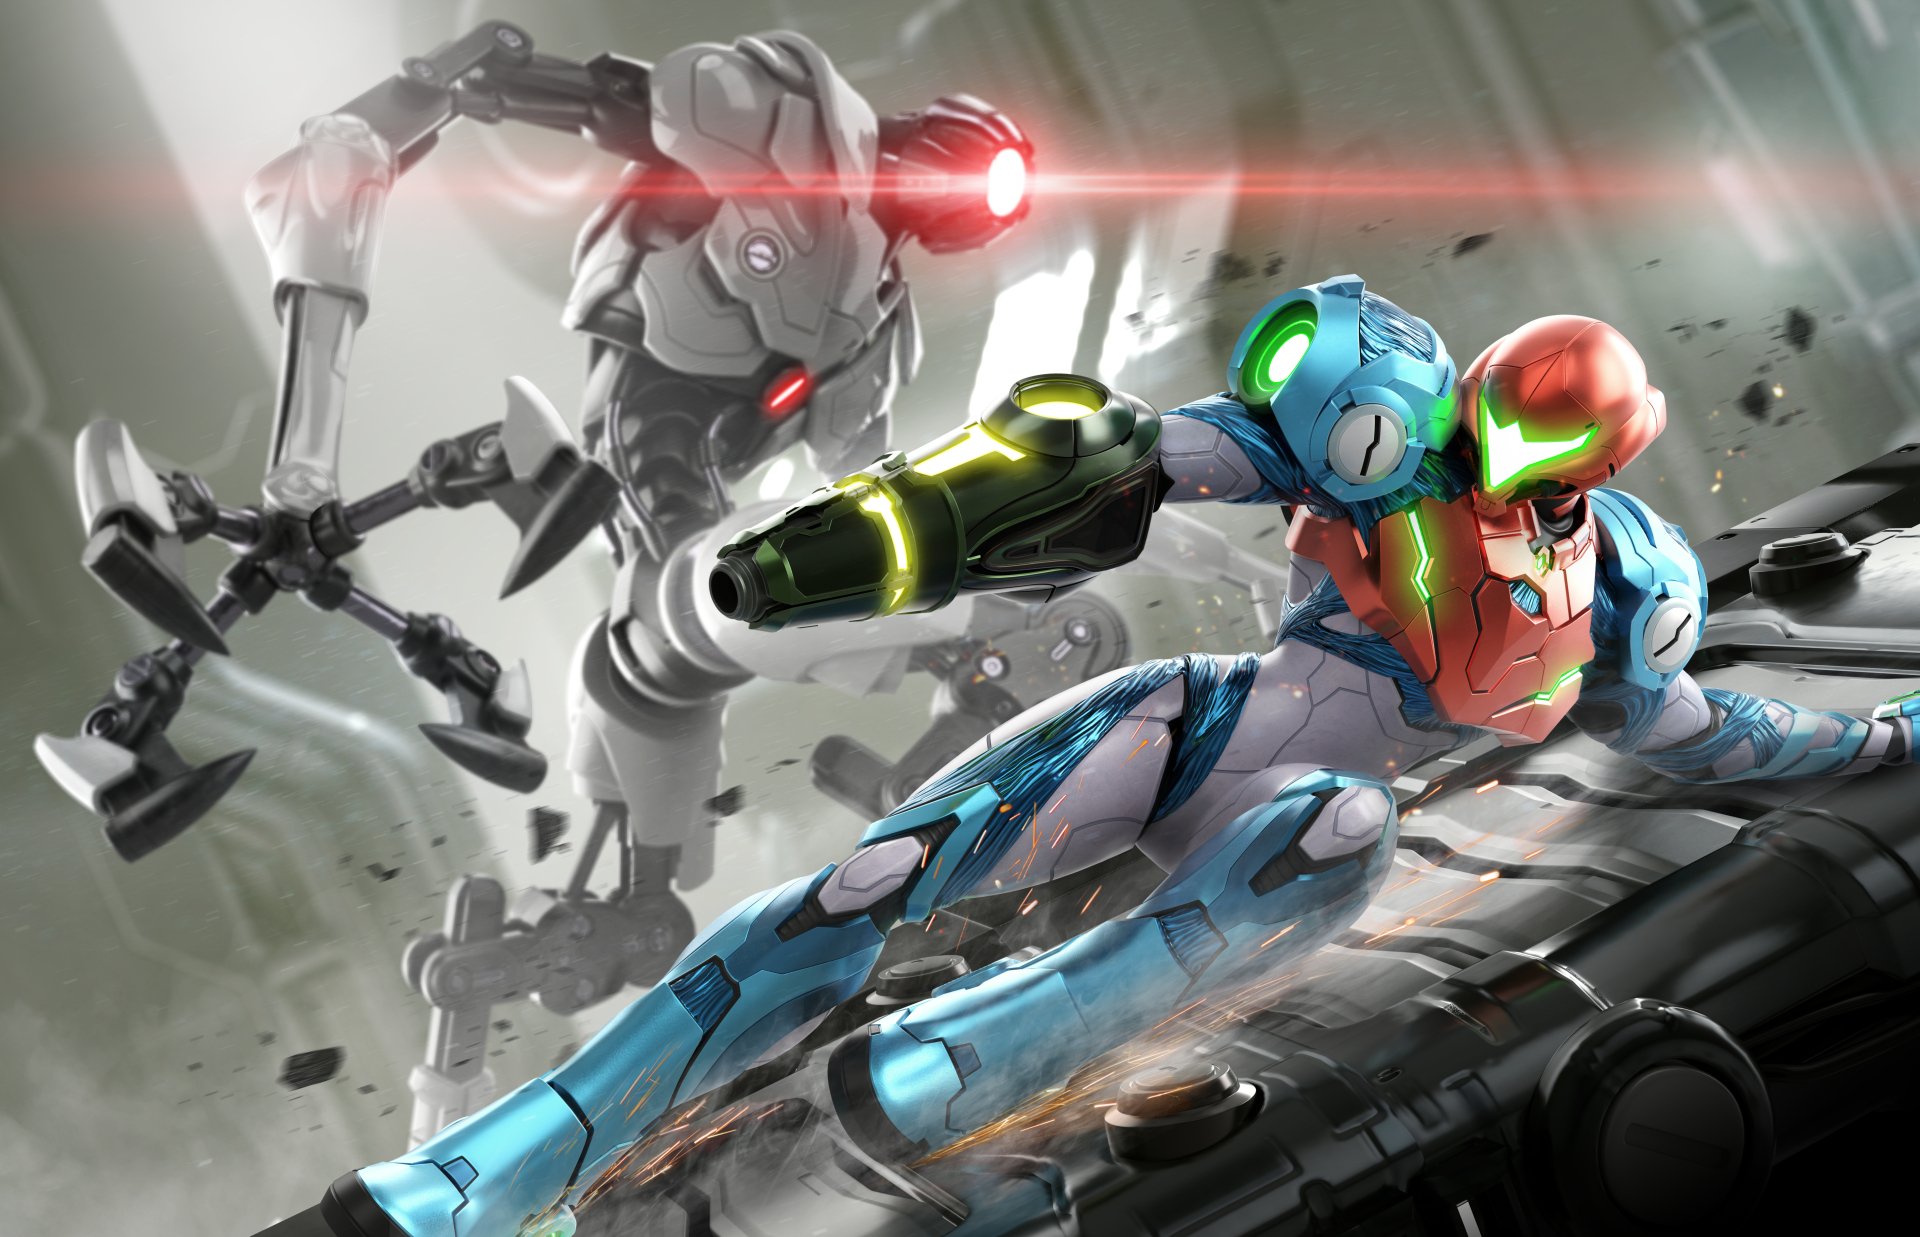 Metroid Dread Wallpapers  Top 25 Best Metroid Dread Background Images